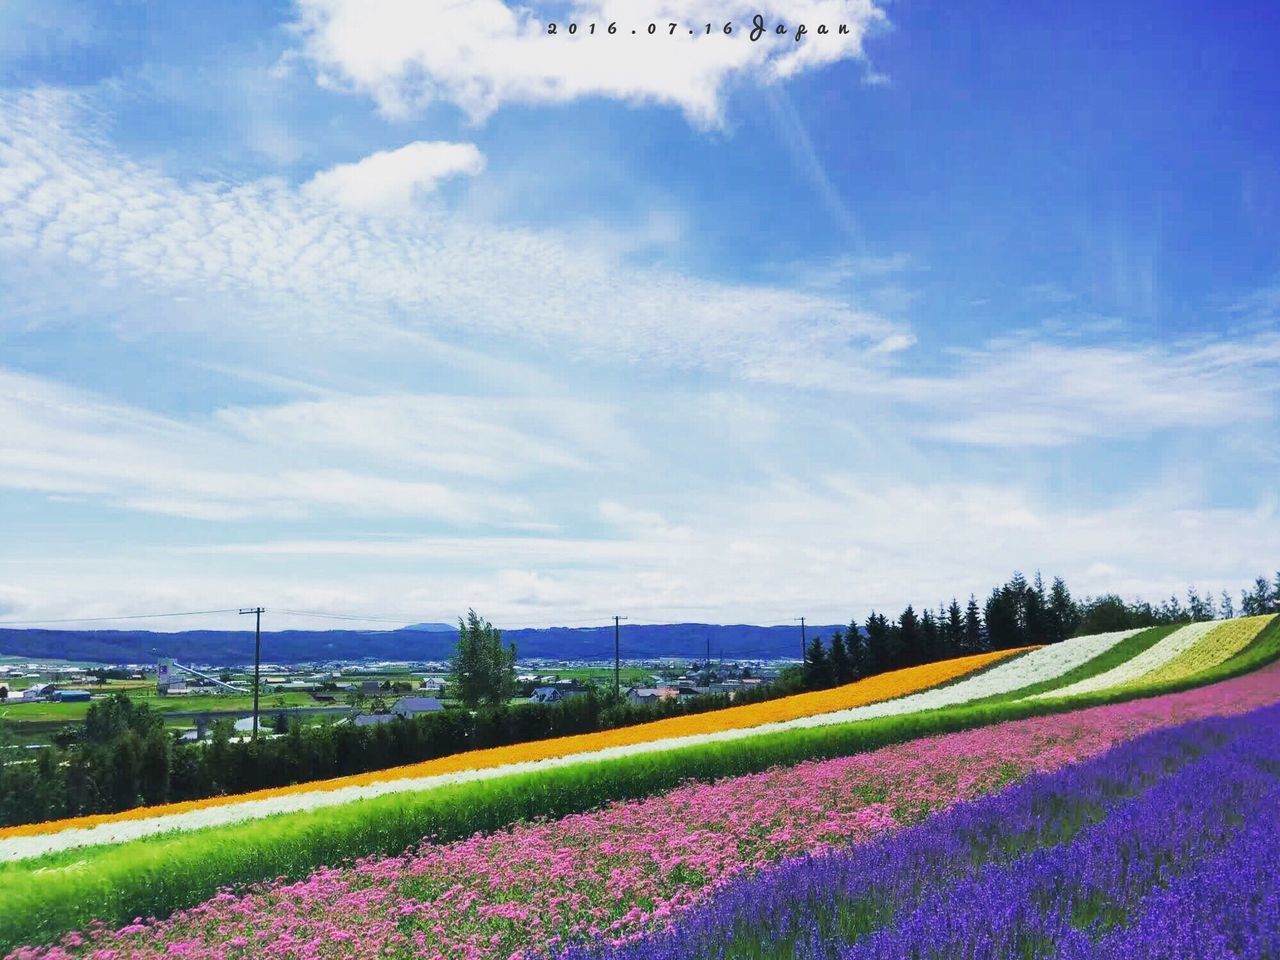 field, sky, landscape, agriculture, growth, blue, flower, beauty in nature, rural scene, cloud - sky, nature, tranquil scene, tranquility, multi colored, scenics, cloud, grass, plant, outdoors, no people, day, idyllic, green color, abundance, colorful, cloudy, fragility, horizon over land, non-urban scene